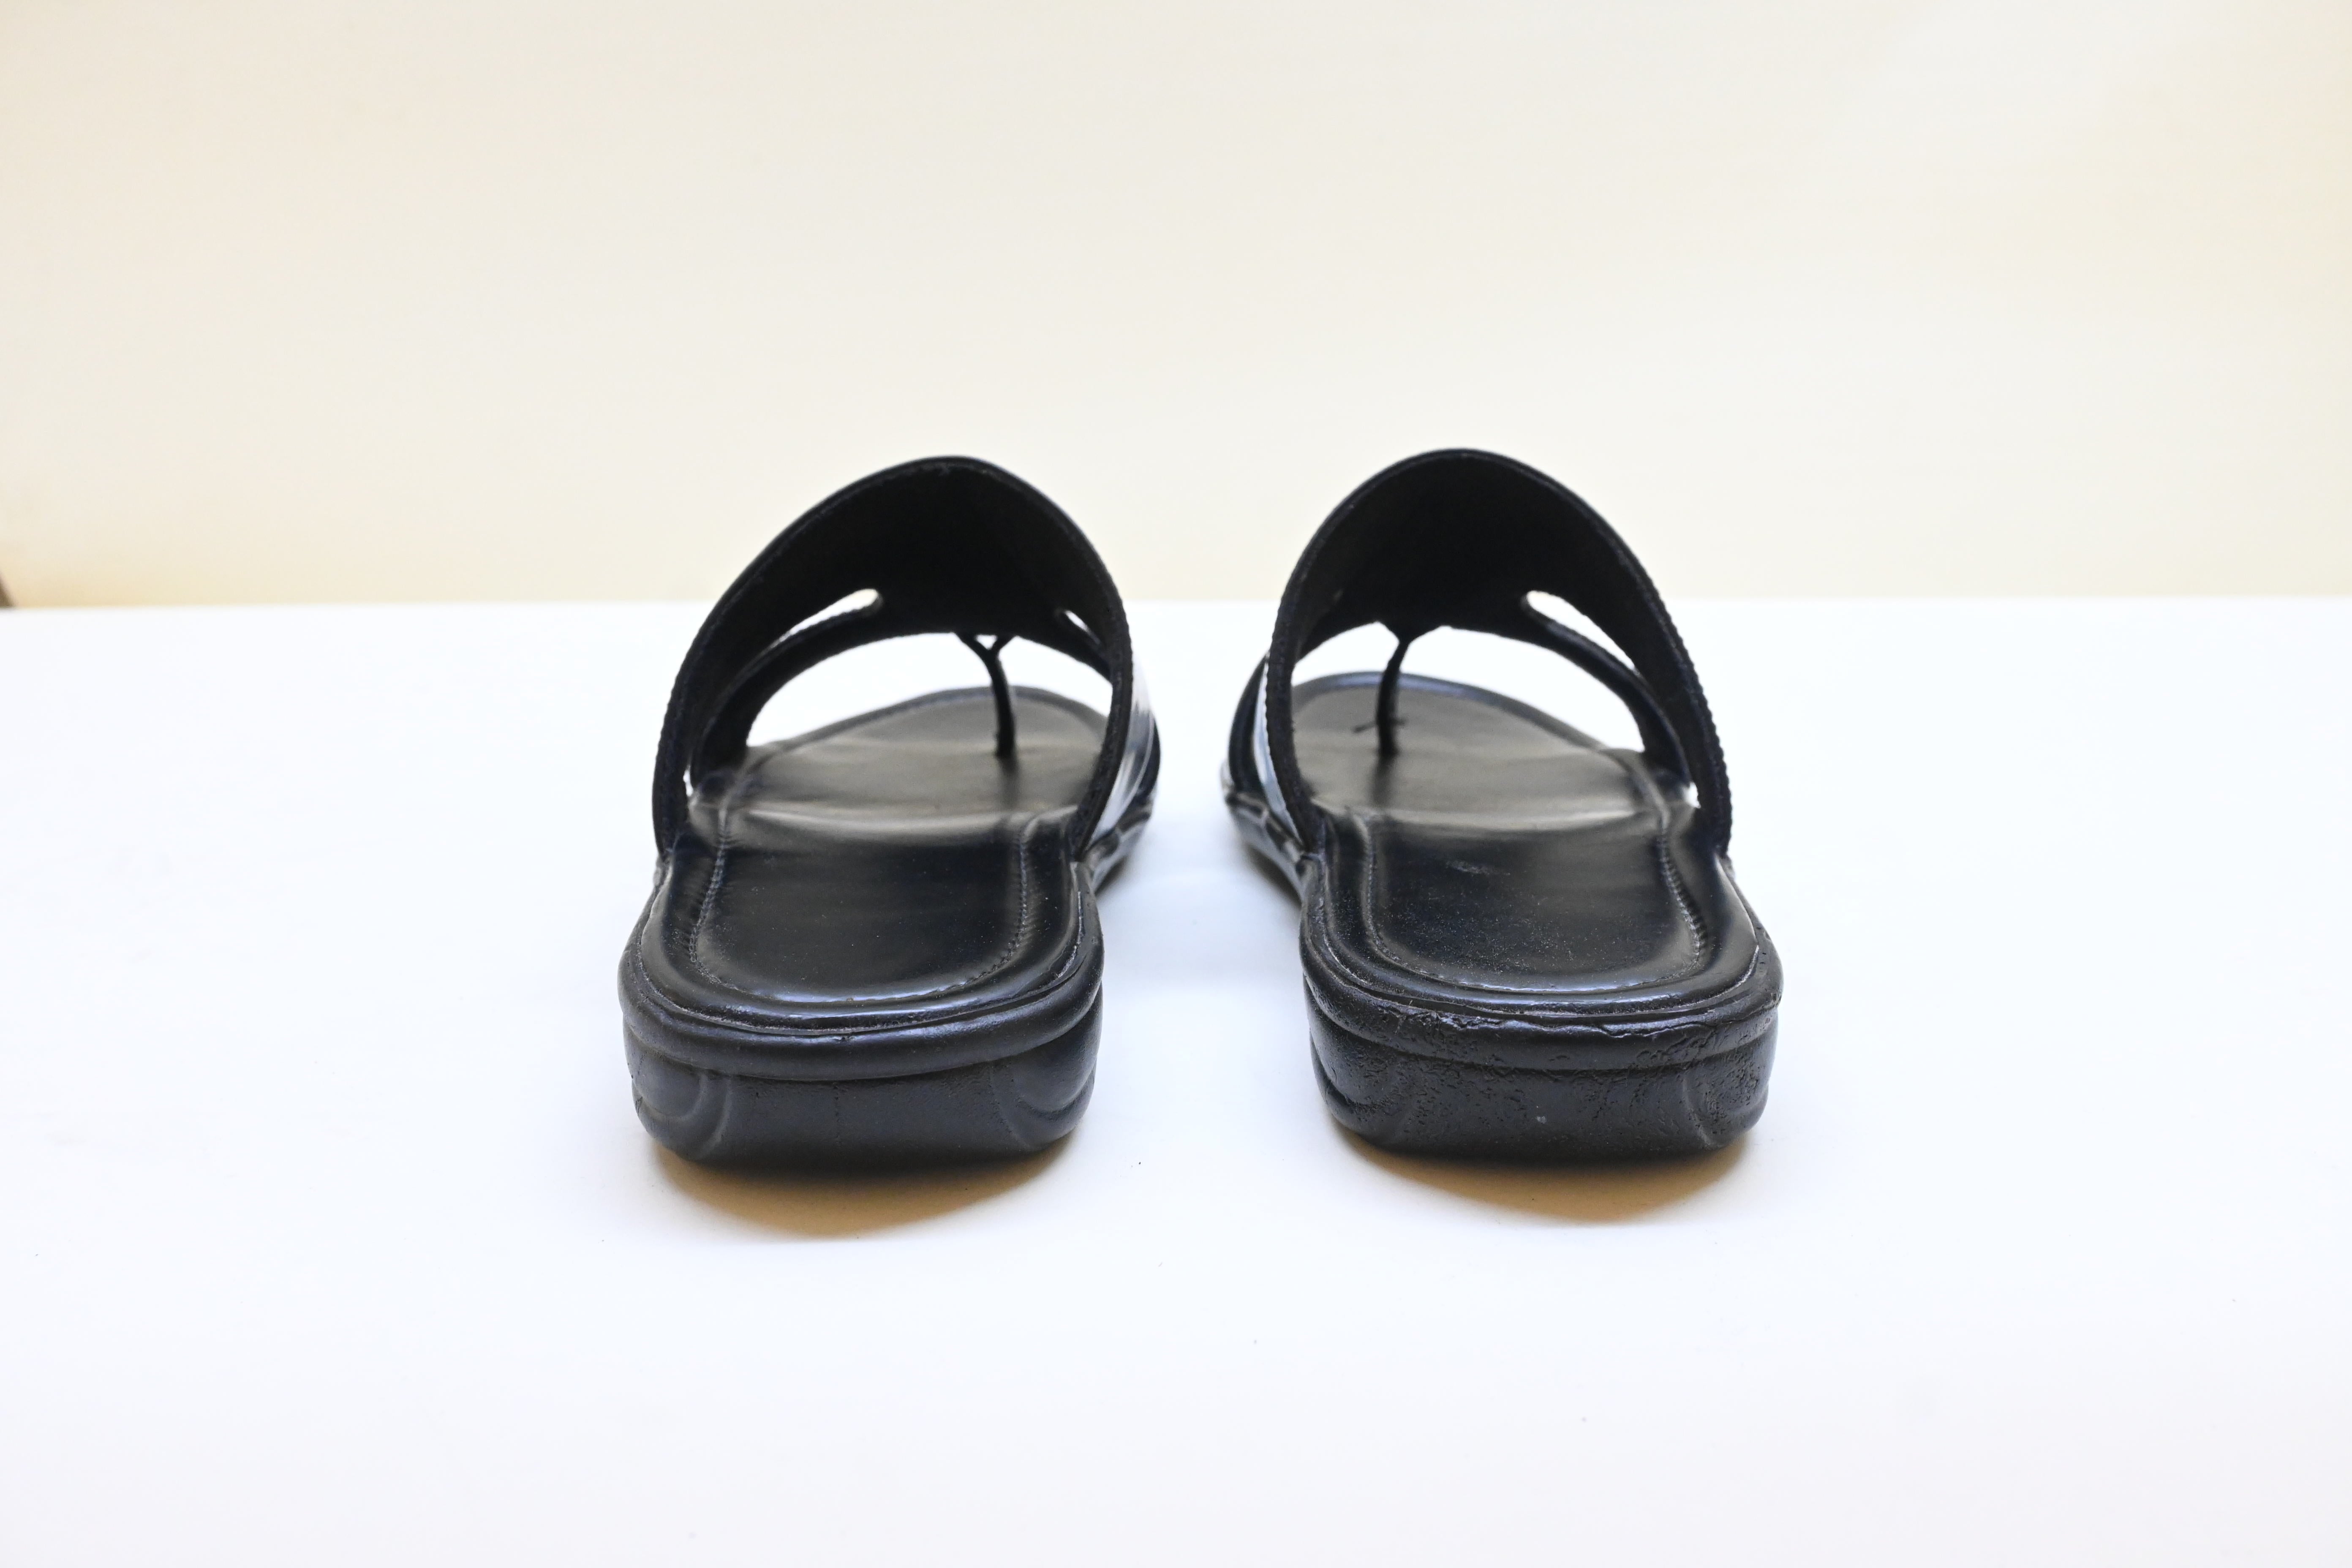 Agra Jail Leather Slippers